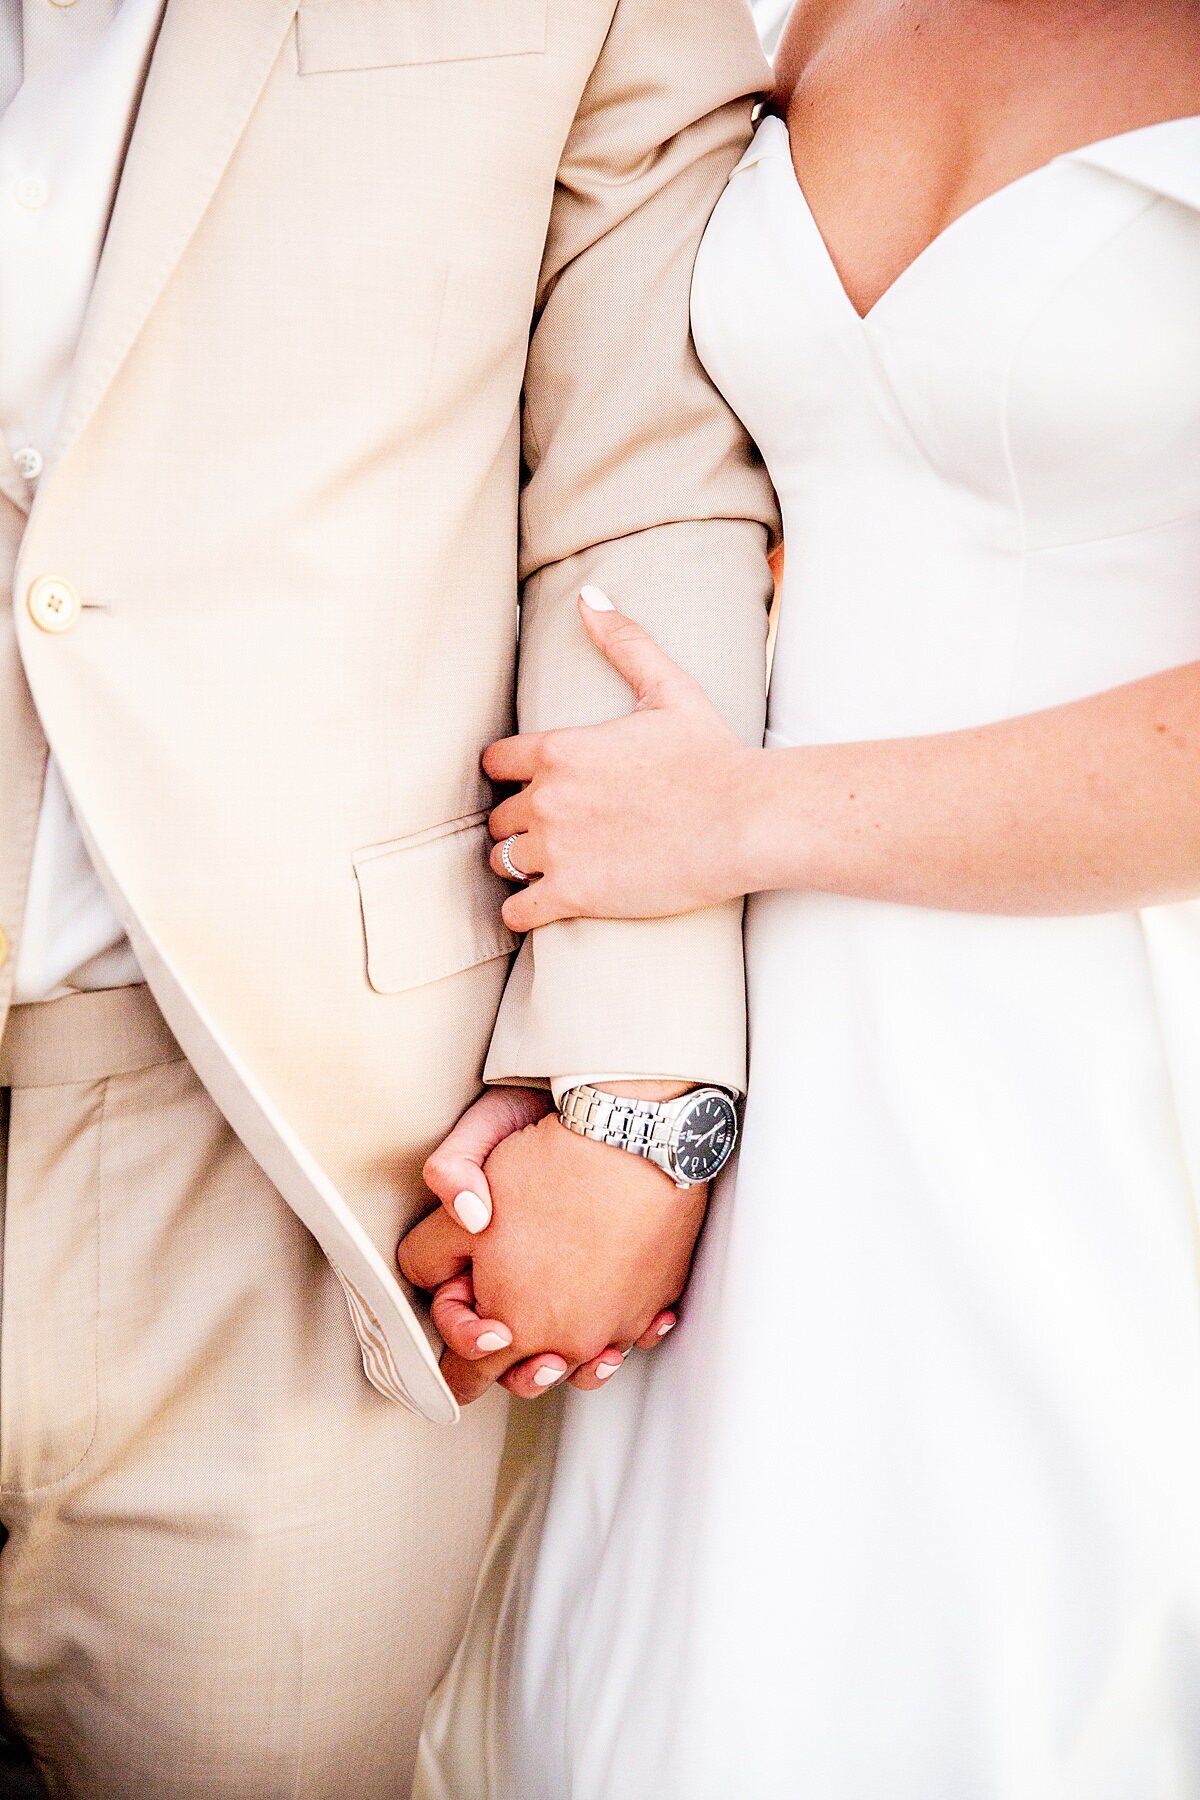 Groom in tan suit and bride in white gown holding hands